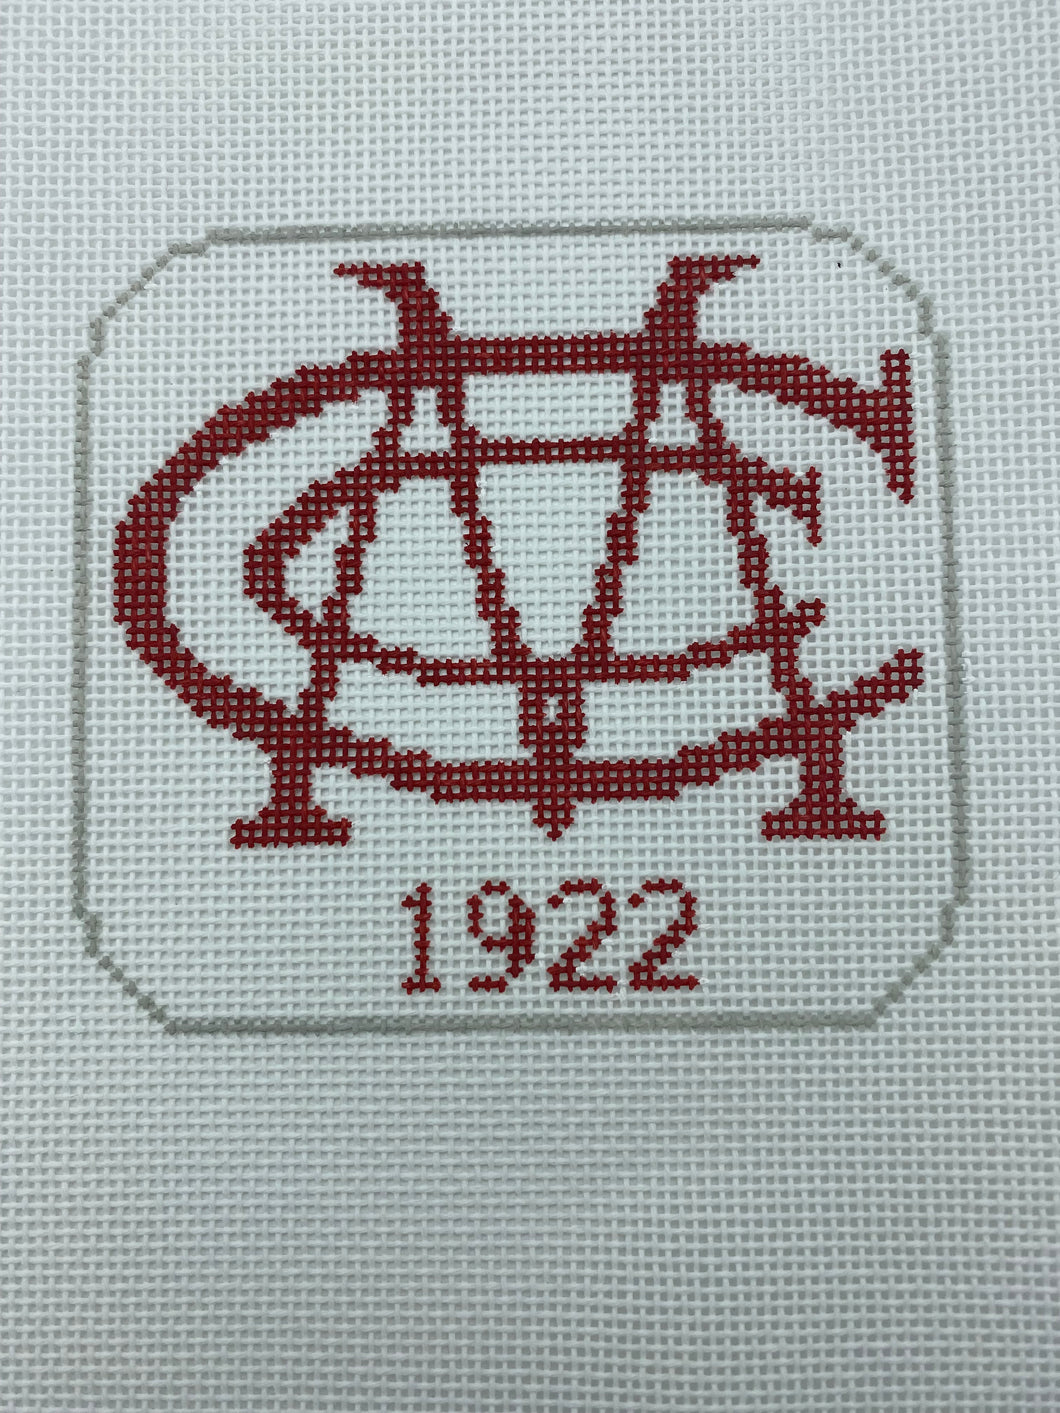 Metairie Country Club Needlepoint Ornament